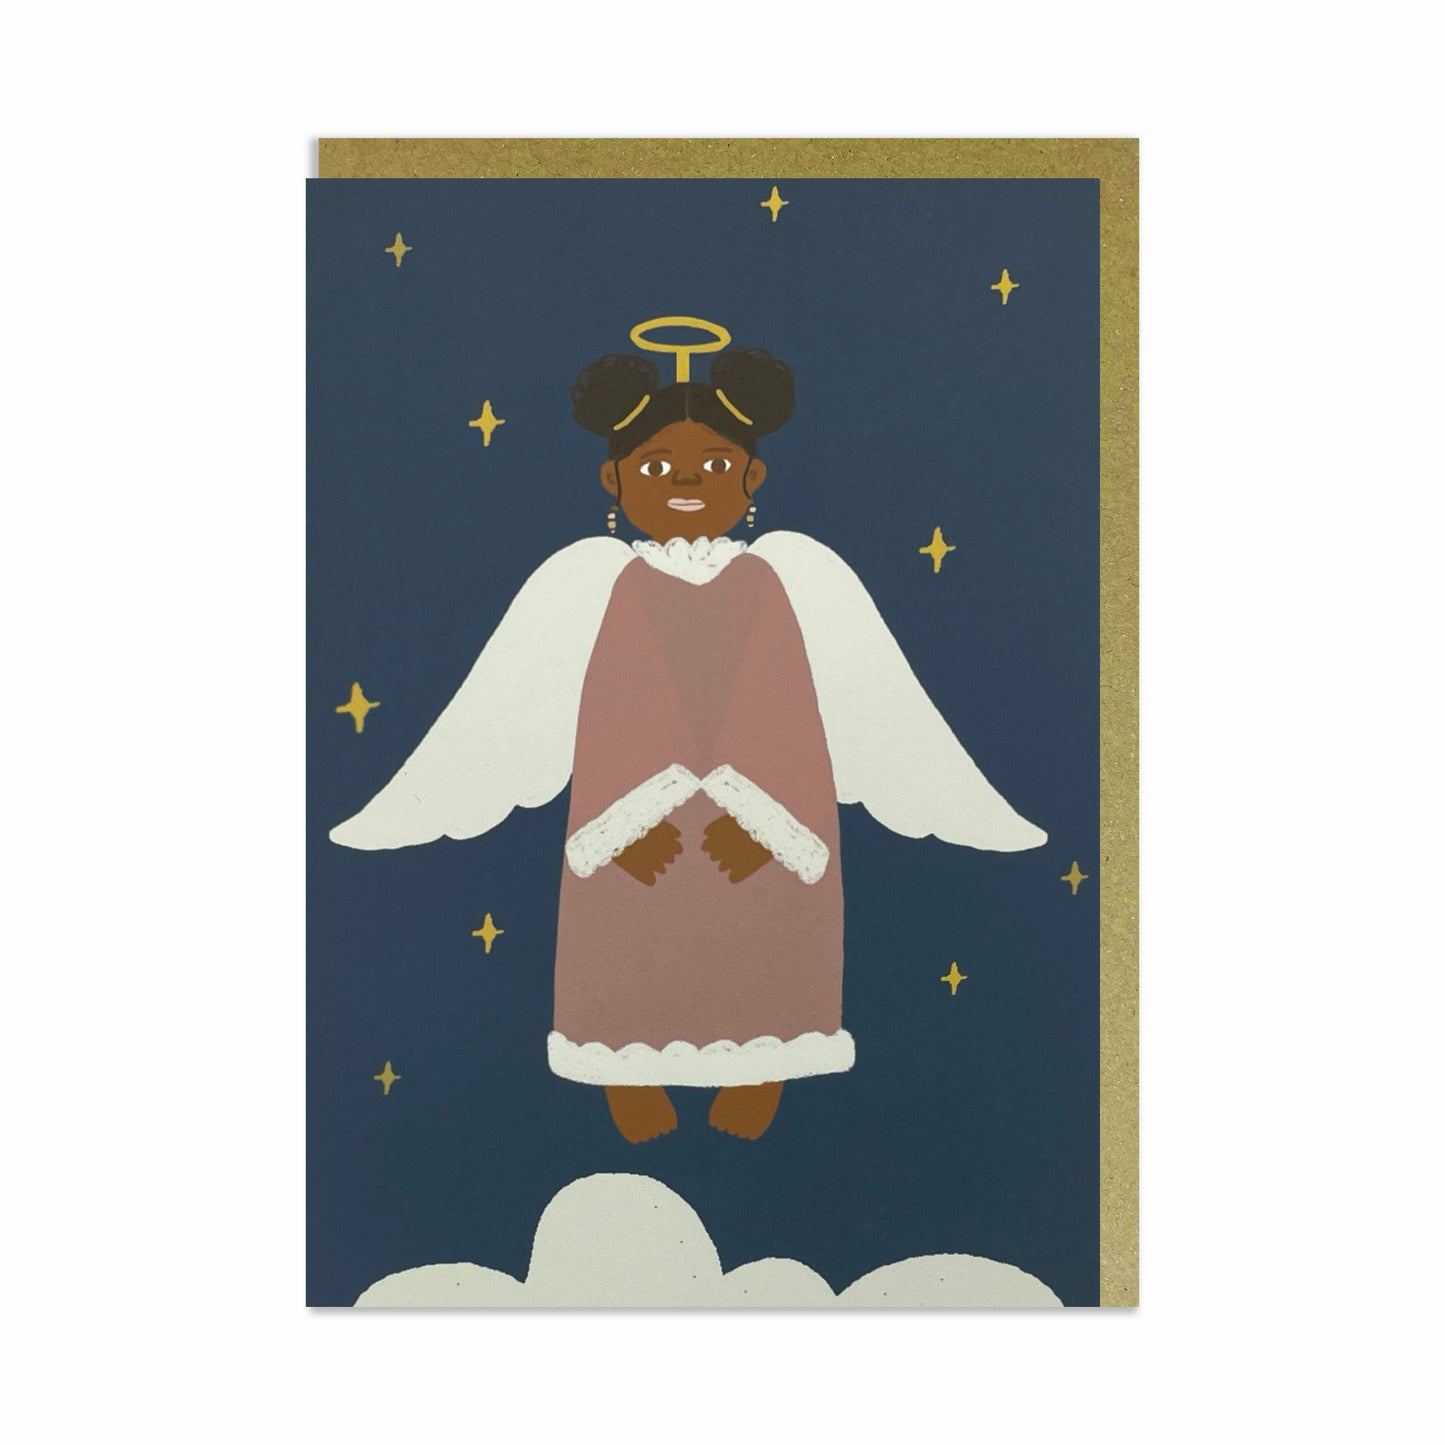 Black Christmas Angel in the sky, surrounded by twinkling stars. Black Christmas card.